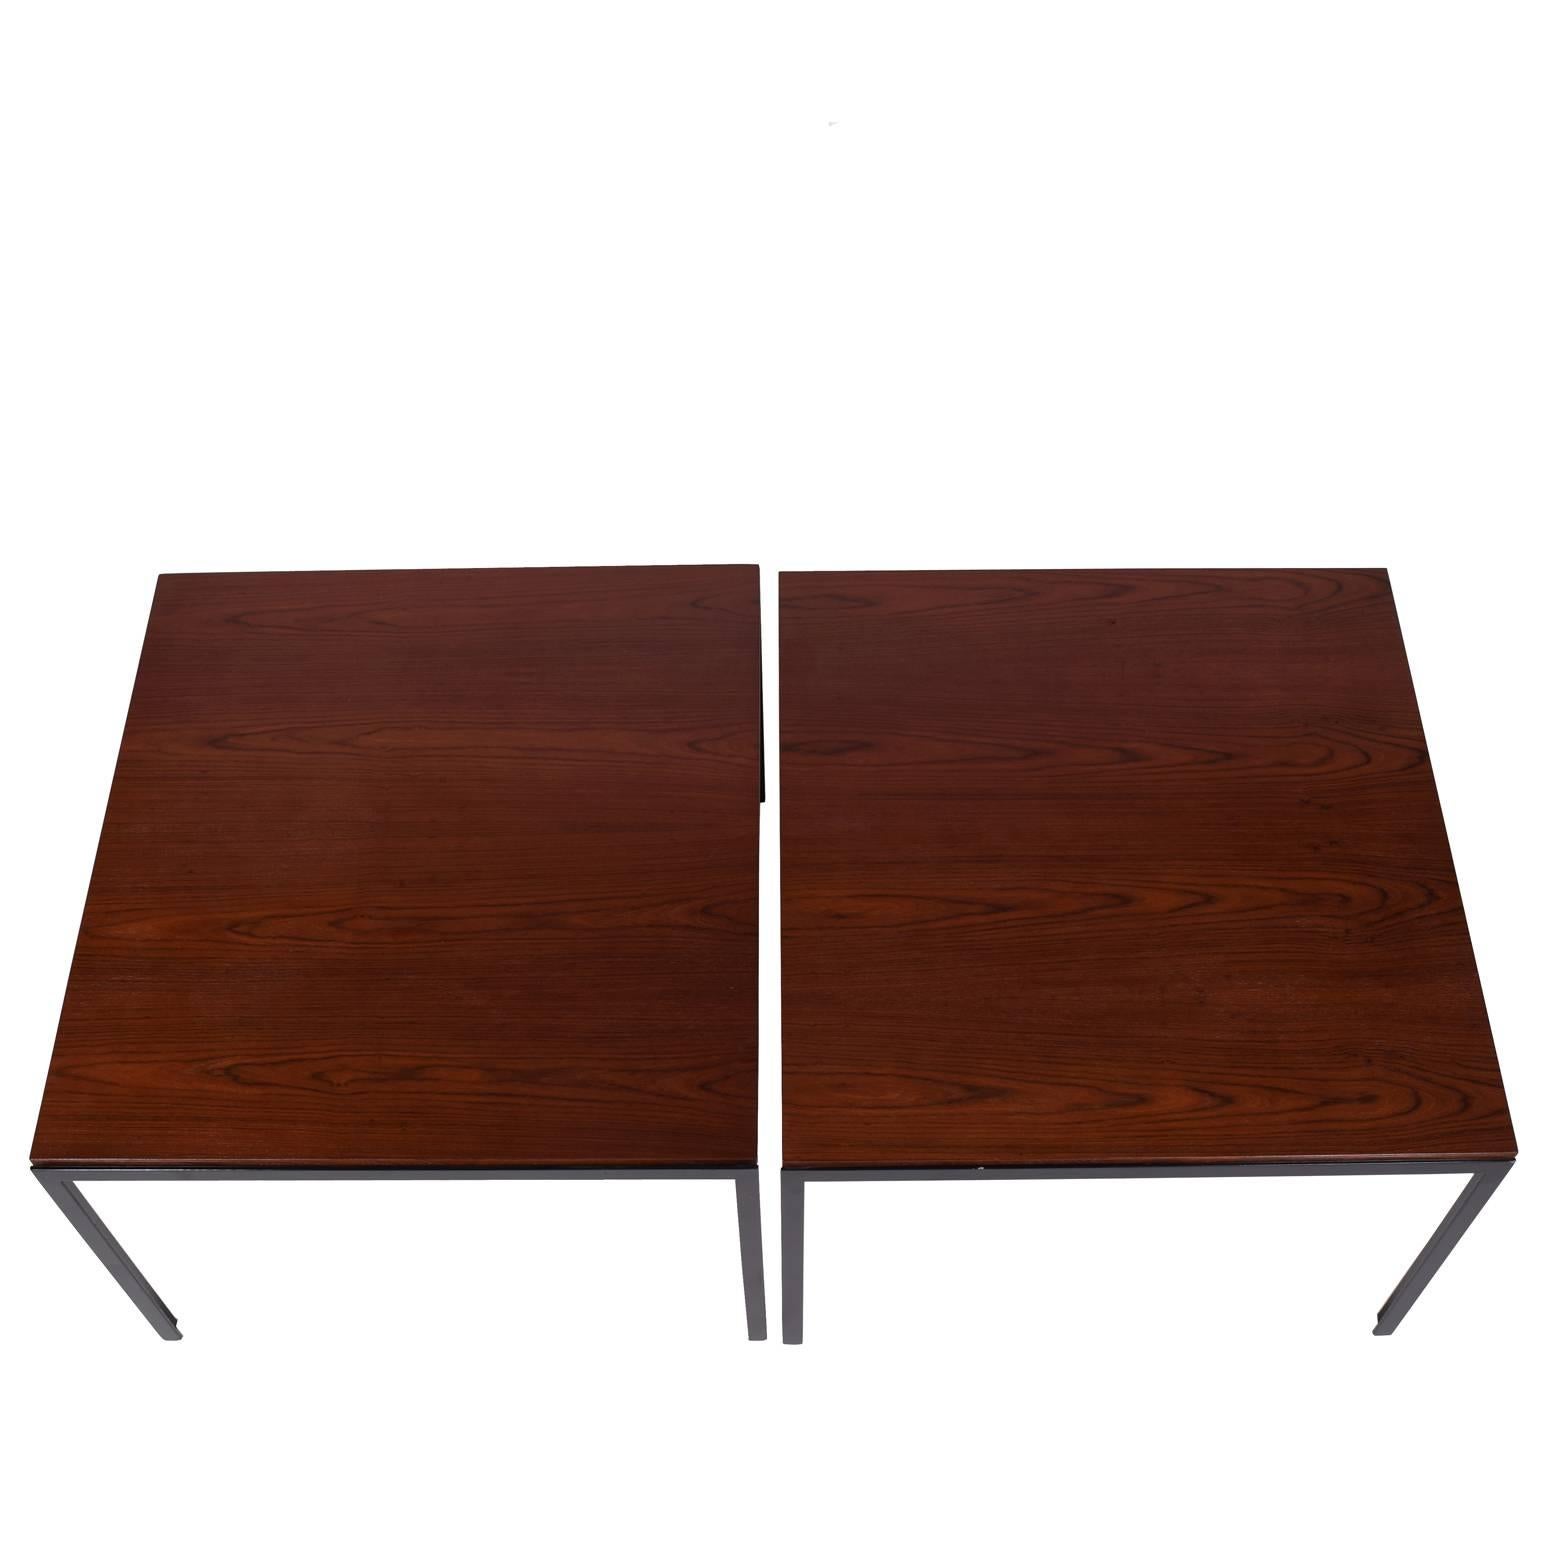 Pair of side tables with black enamel painted flat metal frame and rosewood top. Made by Knoll Associates.